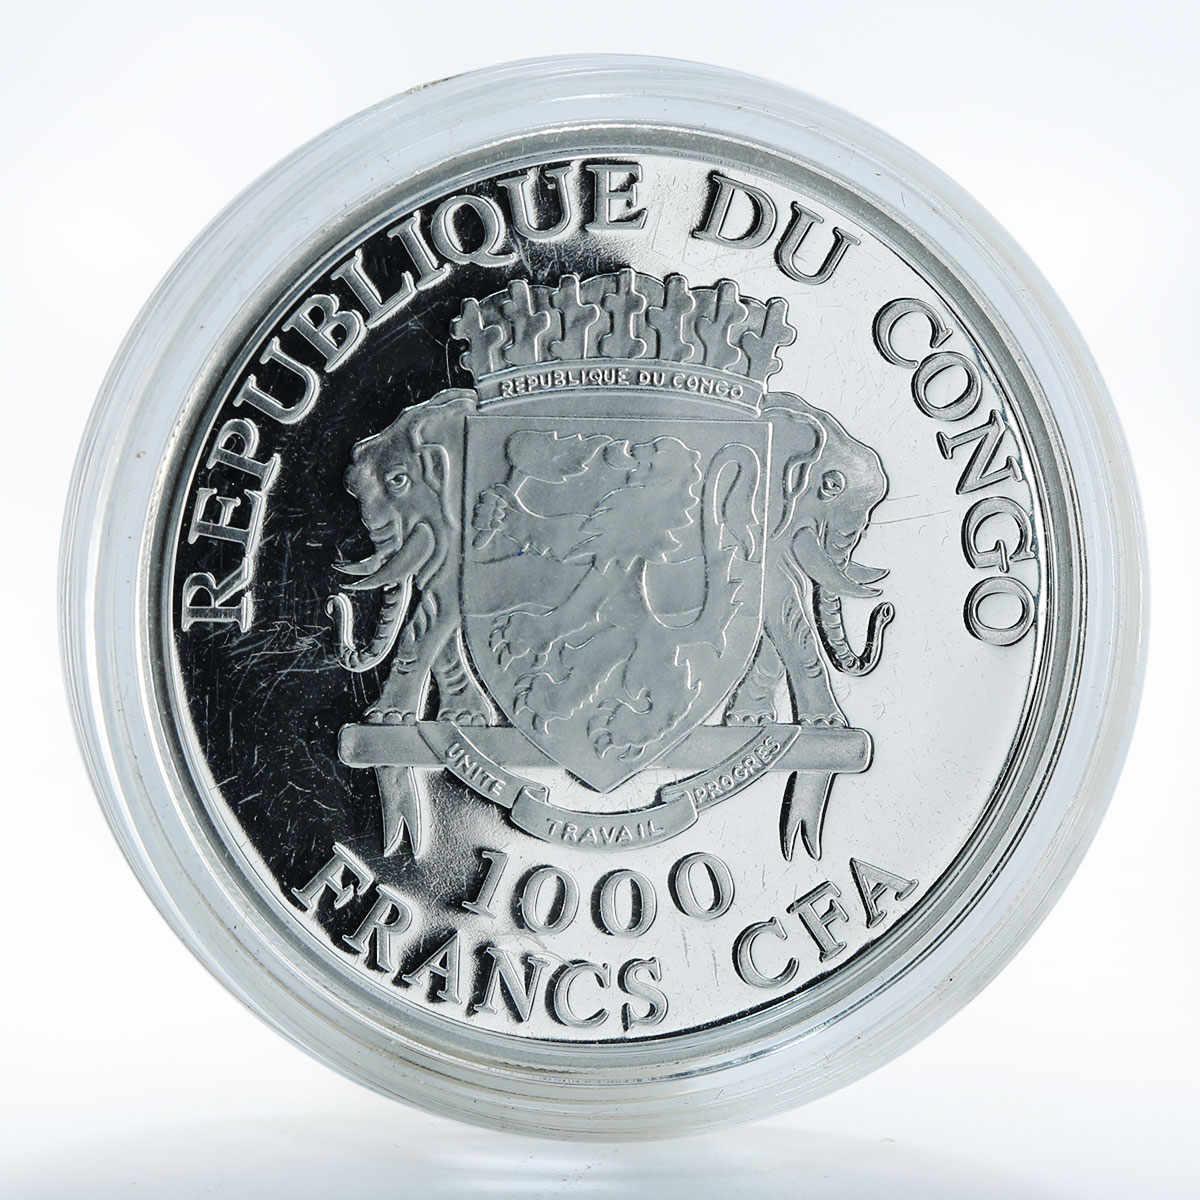 Congo 1000 francs Peter and Phewa religion silver coin 2010